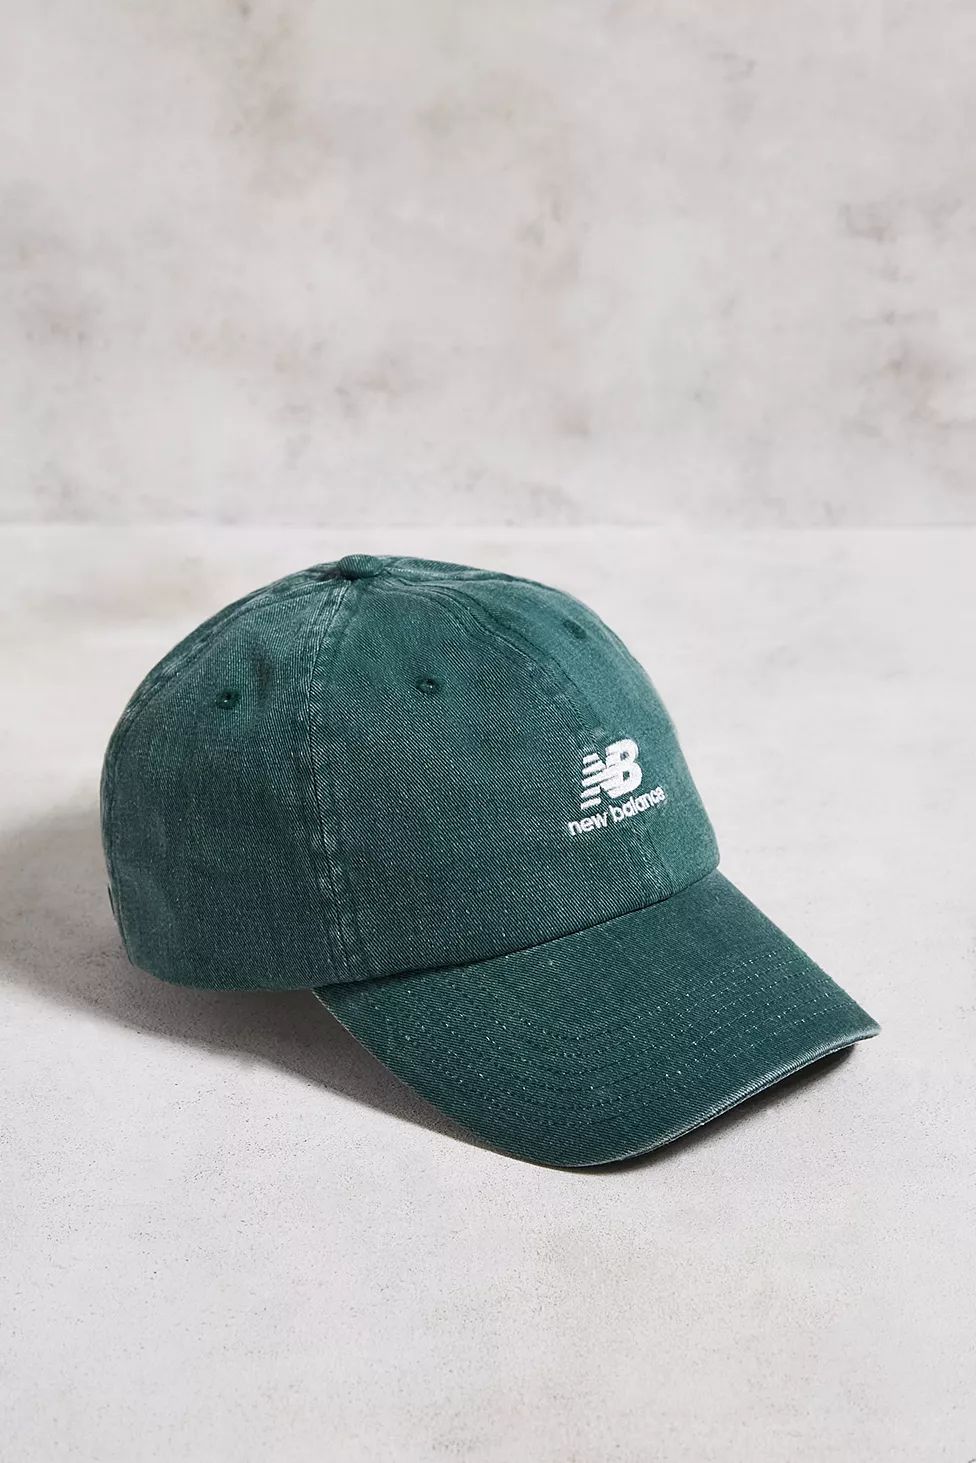 New Balance Washed Green Embroidered Cap | Urban Outfitters (EU)